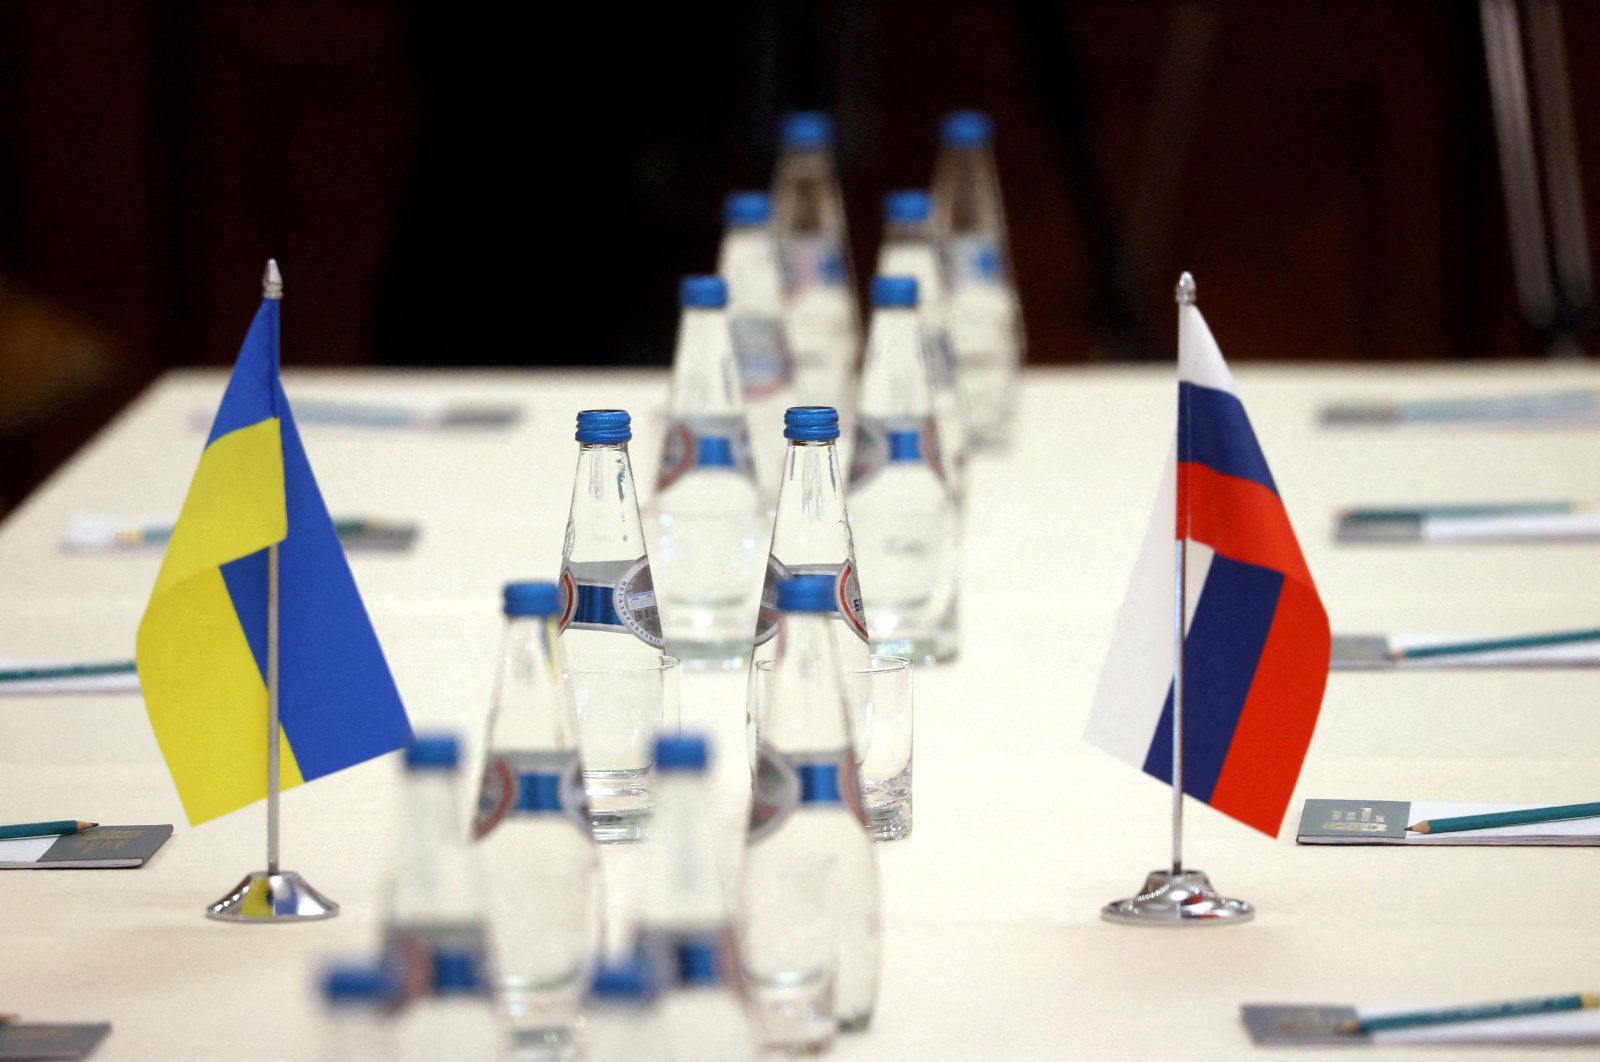 Russian and Ukrainian flags are seen on a table before the talks between officials of the two countries in the Gomel region, Belarus Feb. 28, 2022.  (BelTA/Handout via Reuters)